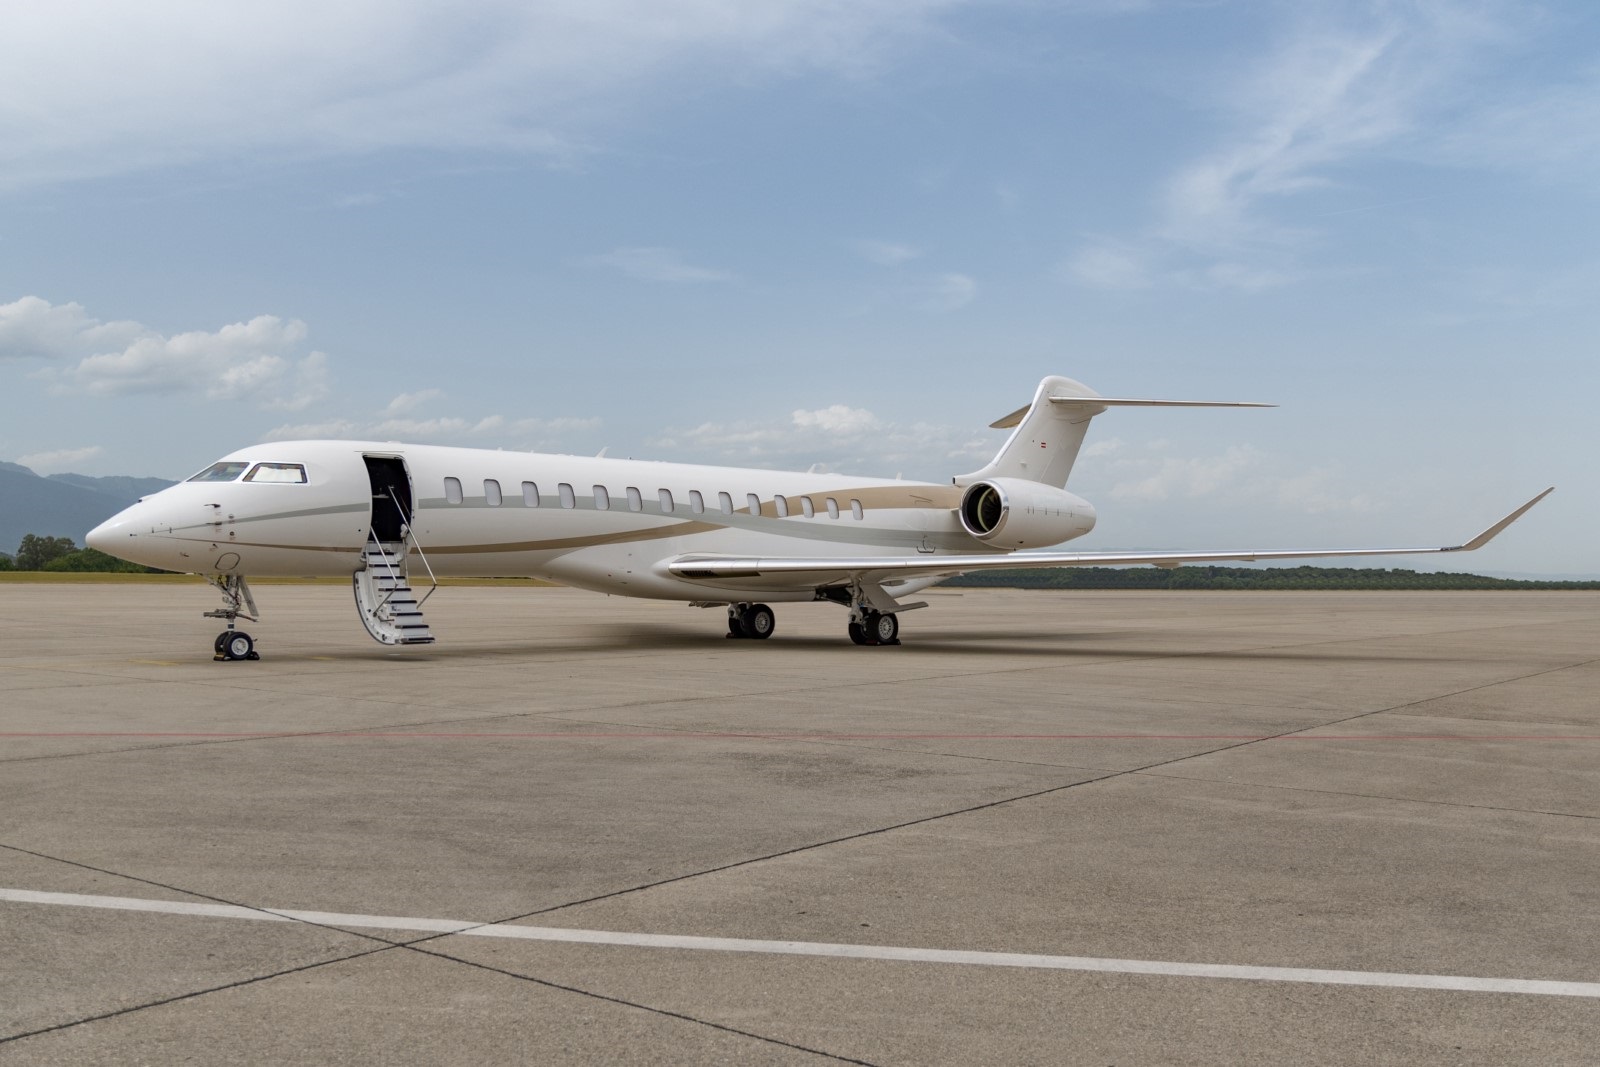 Global Jet’S latest fleet addition for charter - a brand new 2021 Bombardier Global 7500